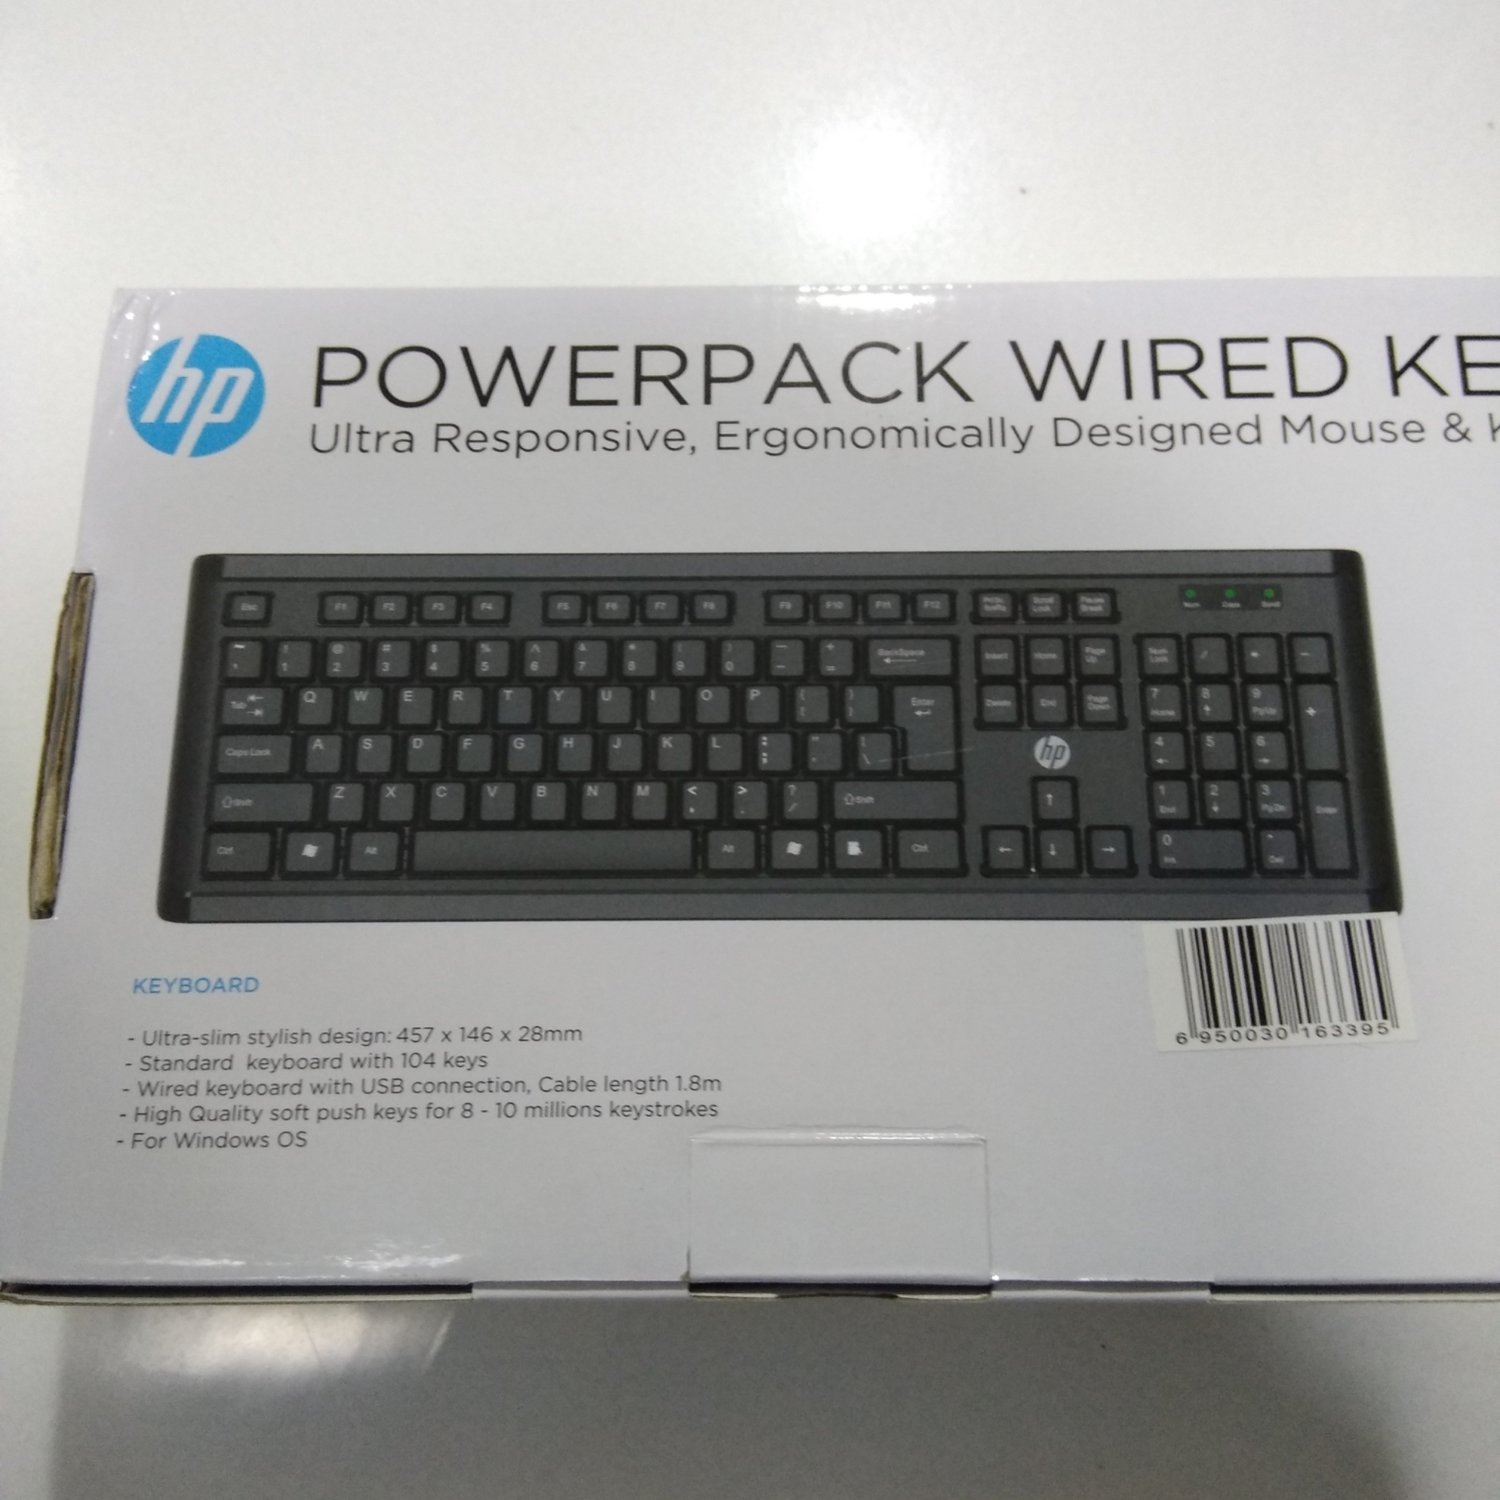 HP Power Pack Keyboard Mouse, Combo Pack